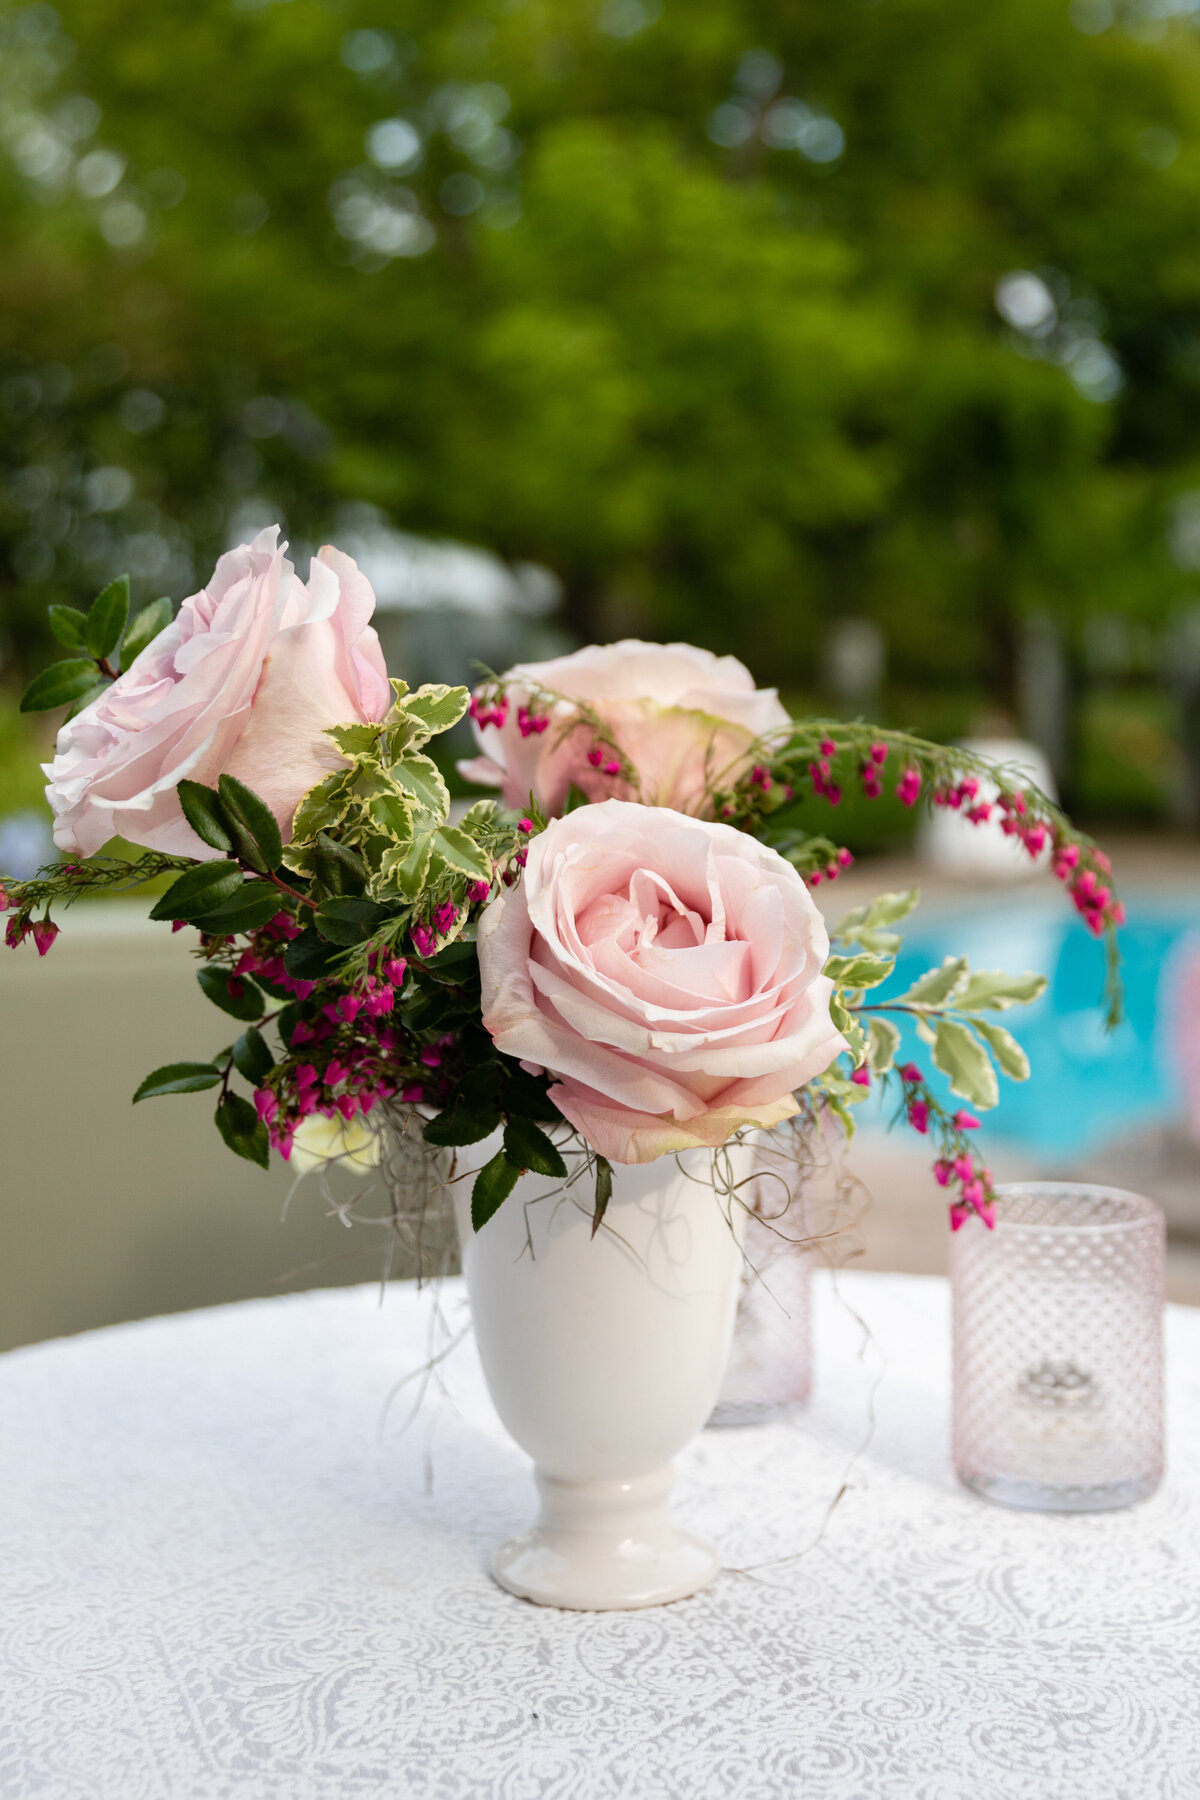 Bridgerton inspired engagement party at a private home in Nashville, TN with color blocked flower arrangements in shades of pink, blue, and lavender with matching votives candles. Natural greenery, garden roses, ranunculus, and wildflowers.